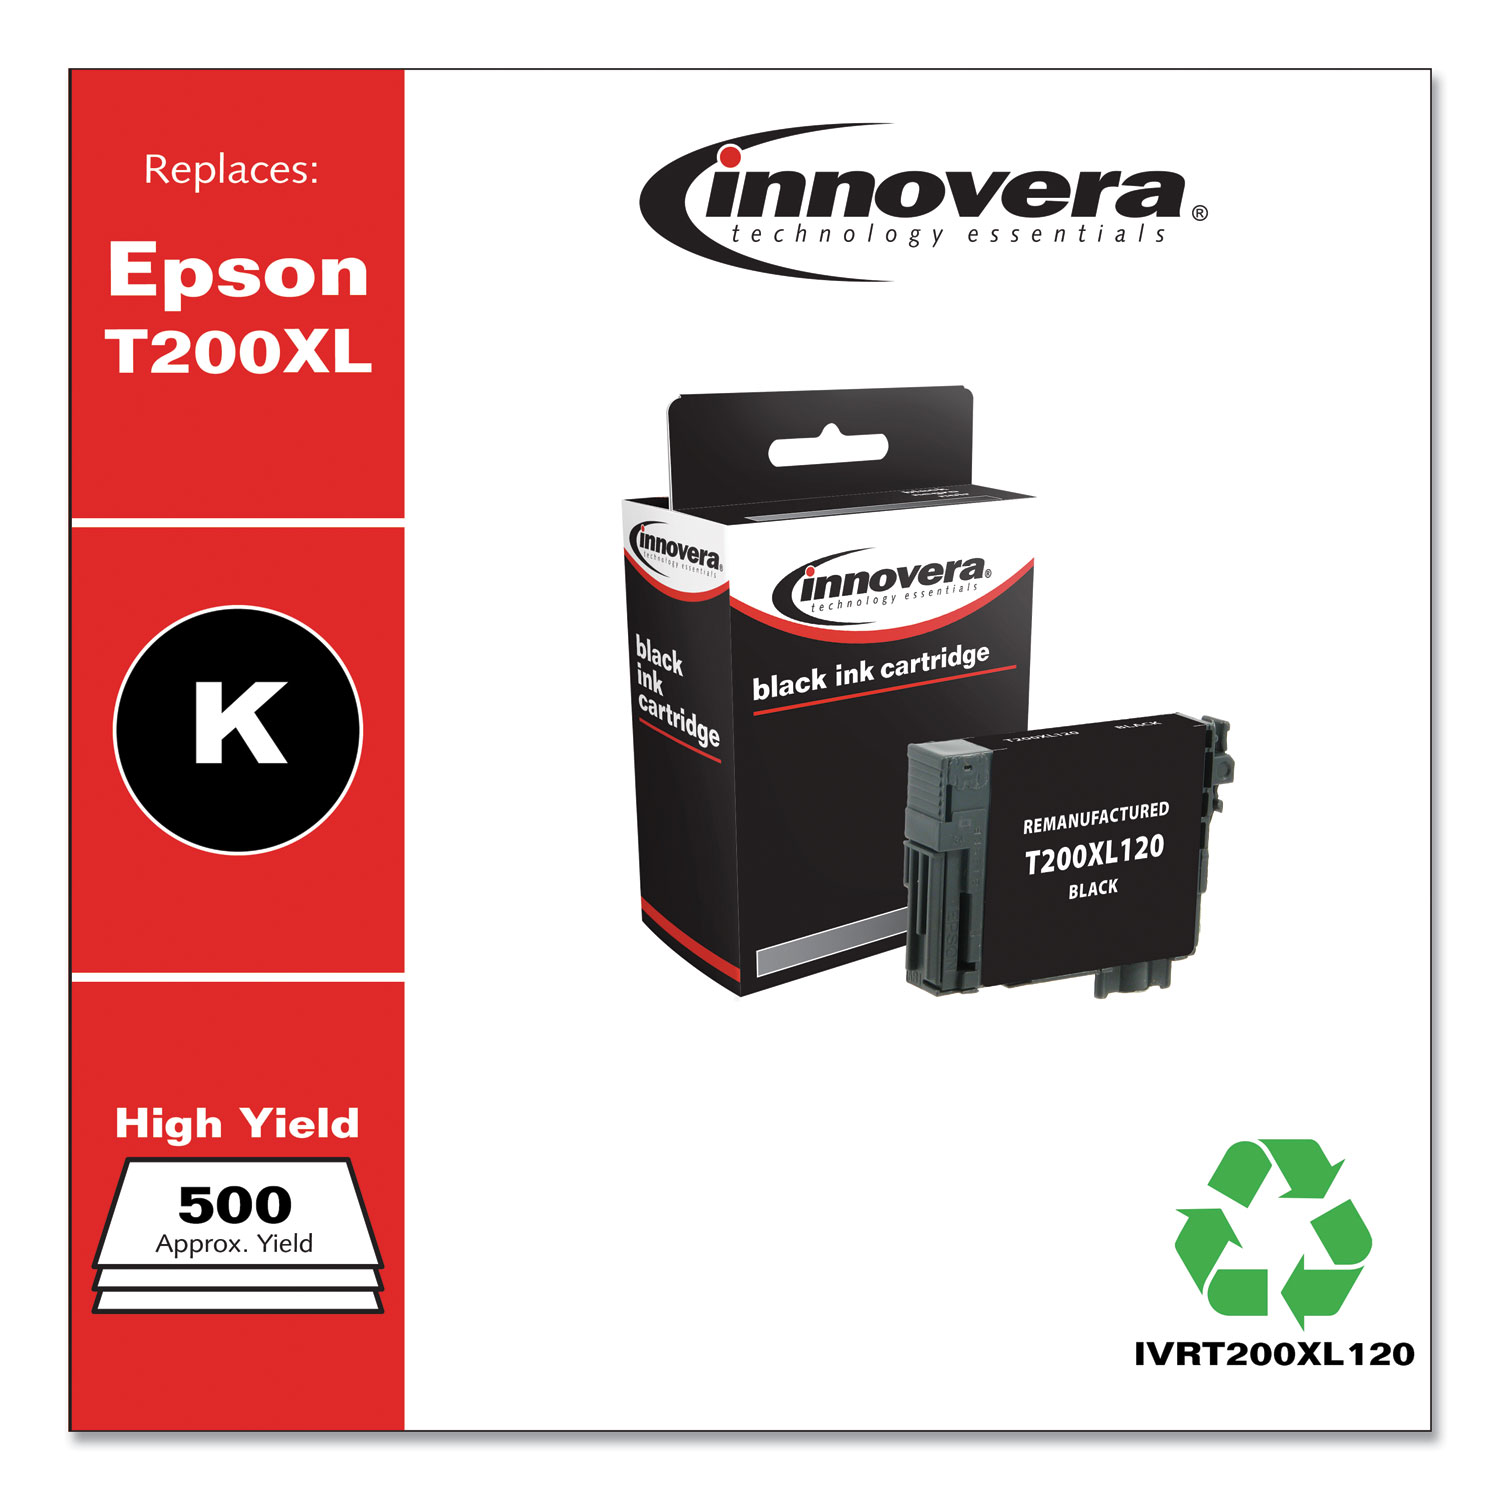  Innovera IVRT200XL120 Remanufactured Black High-Yield Ink, Replacement for Epson T200XL (T200XL120), 500 Page-Yield (IVRT200XL120) 